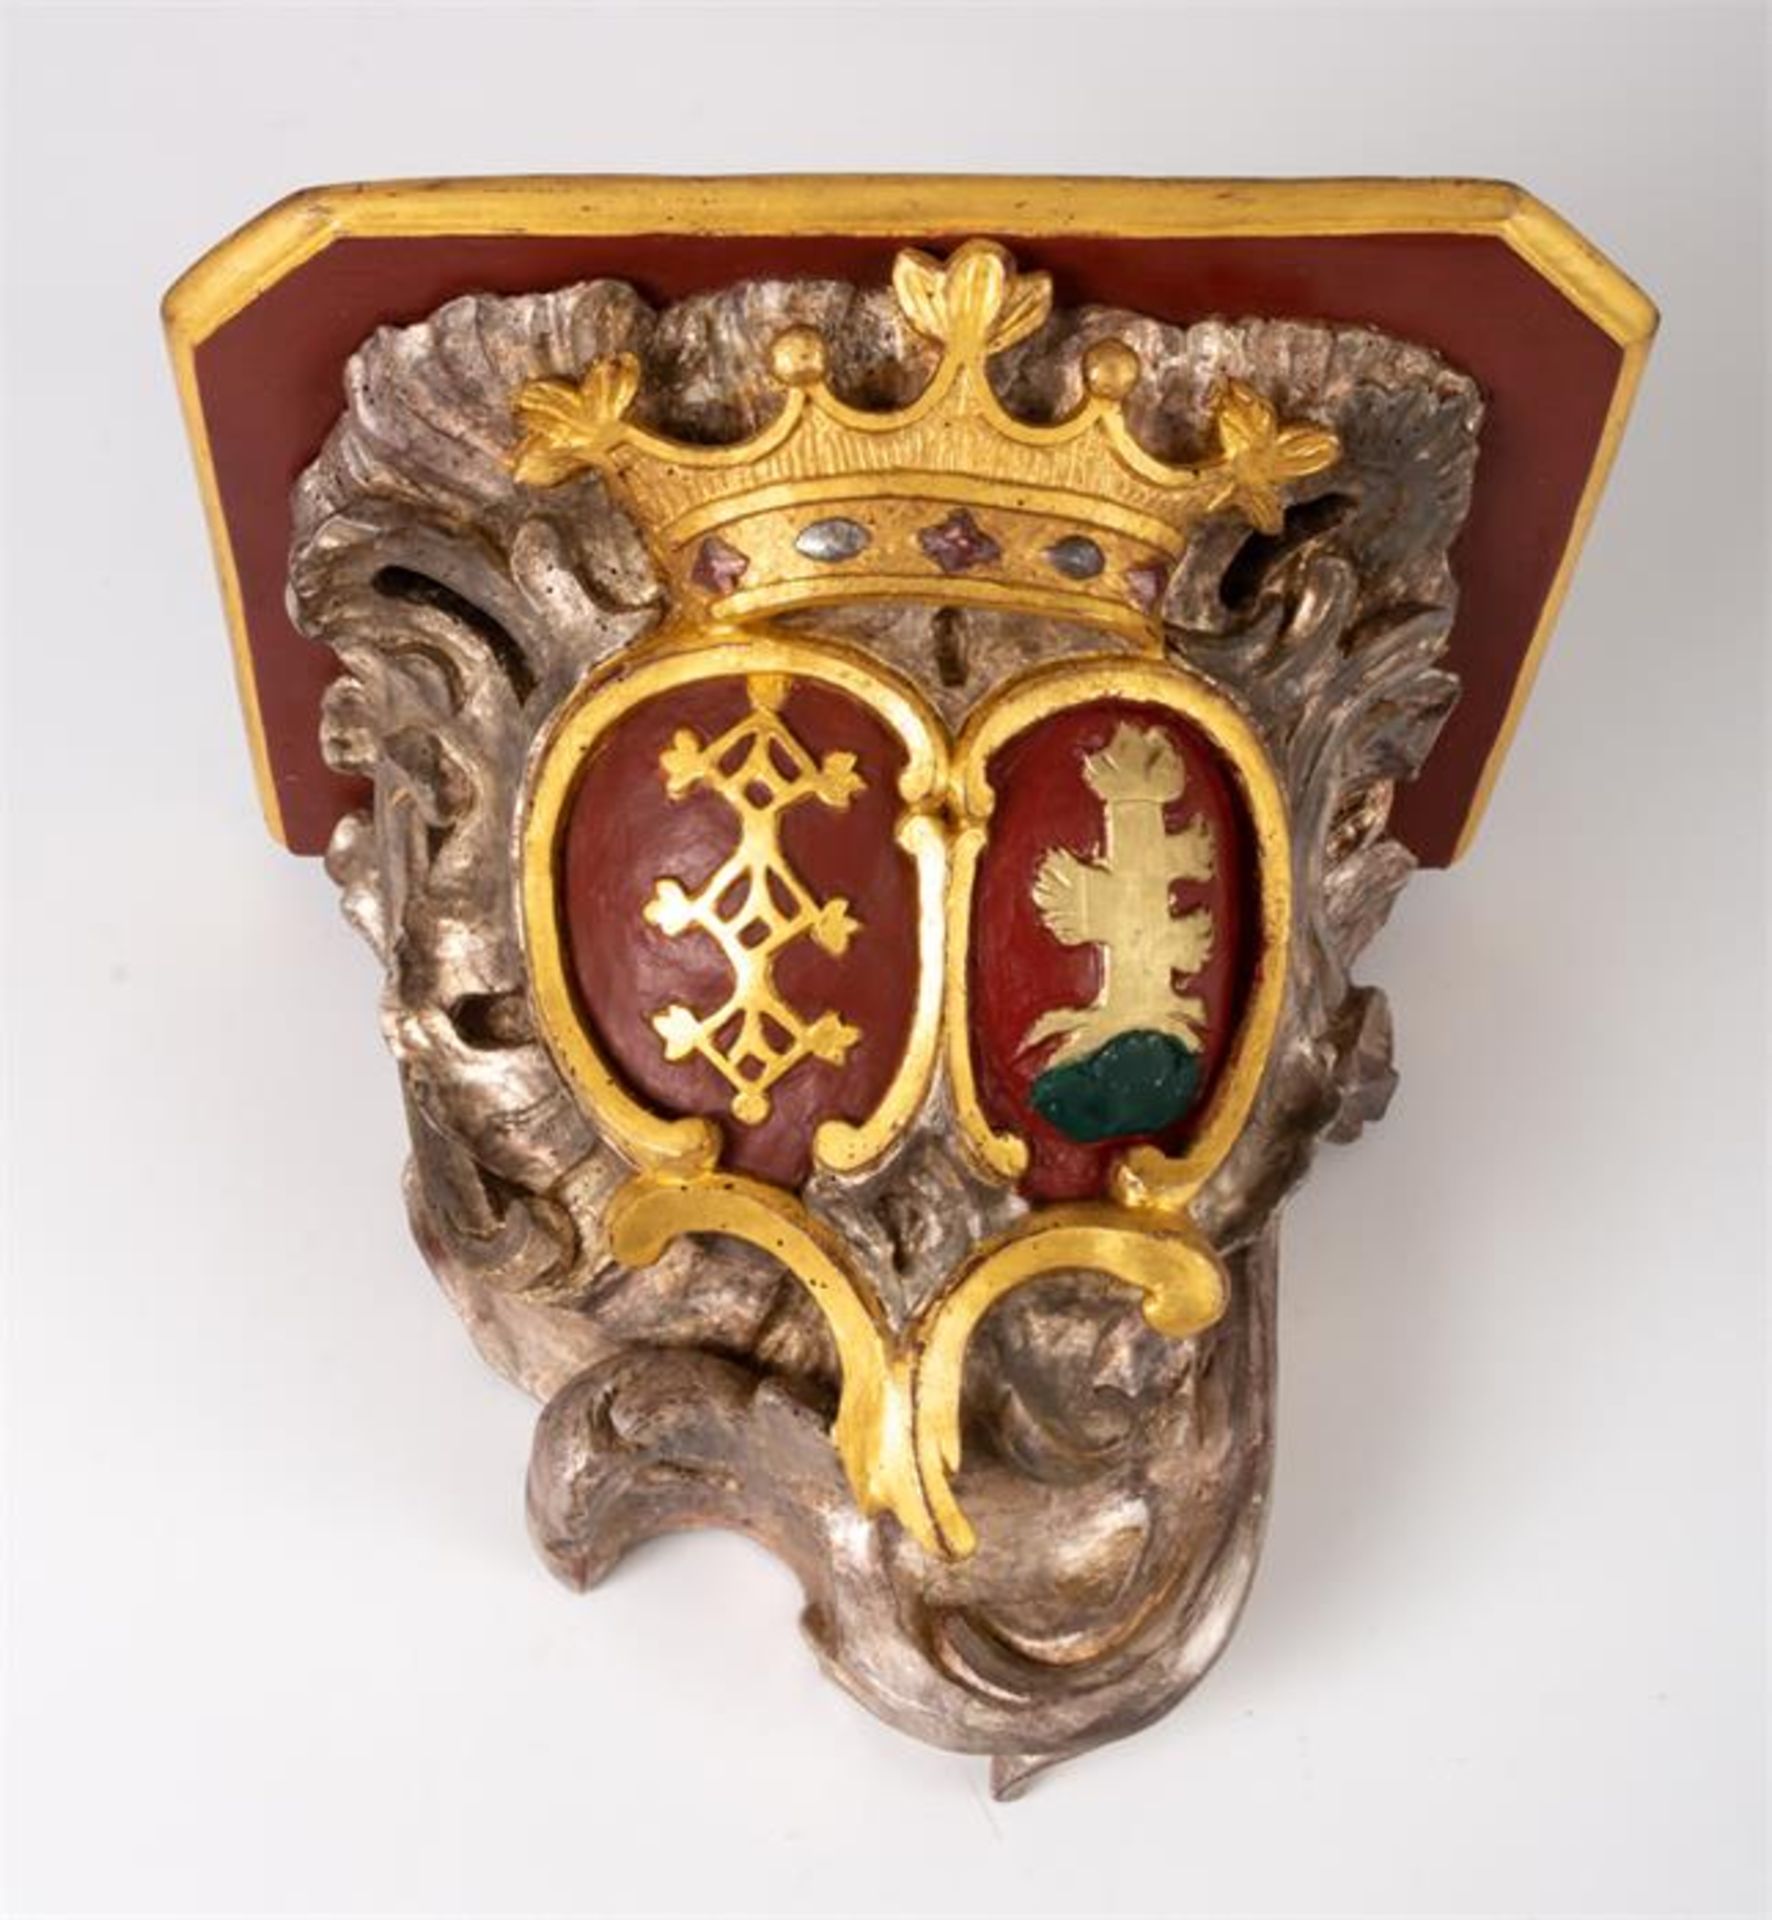 CONSOLE WITH COAT OF ARMS